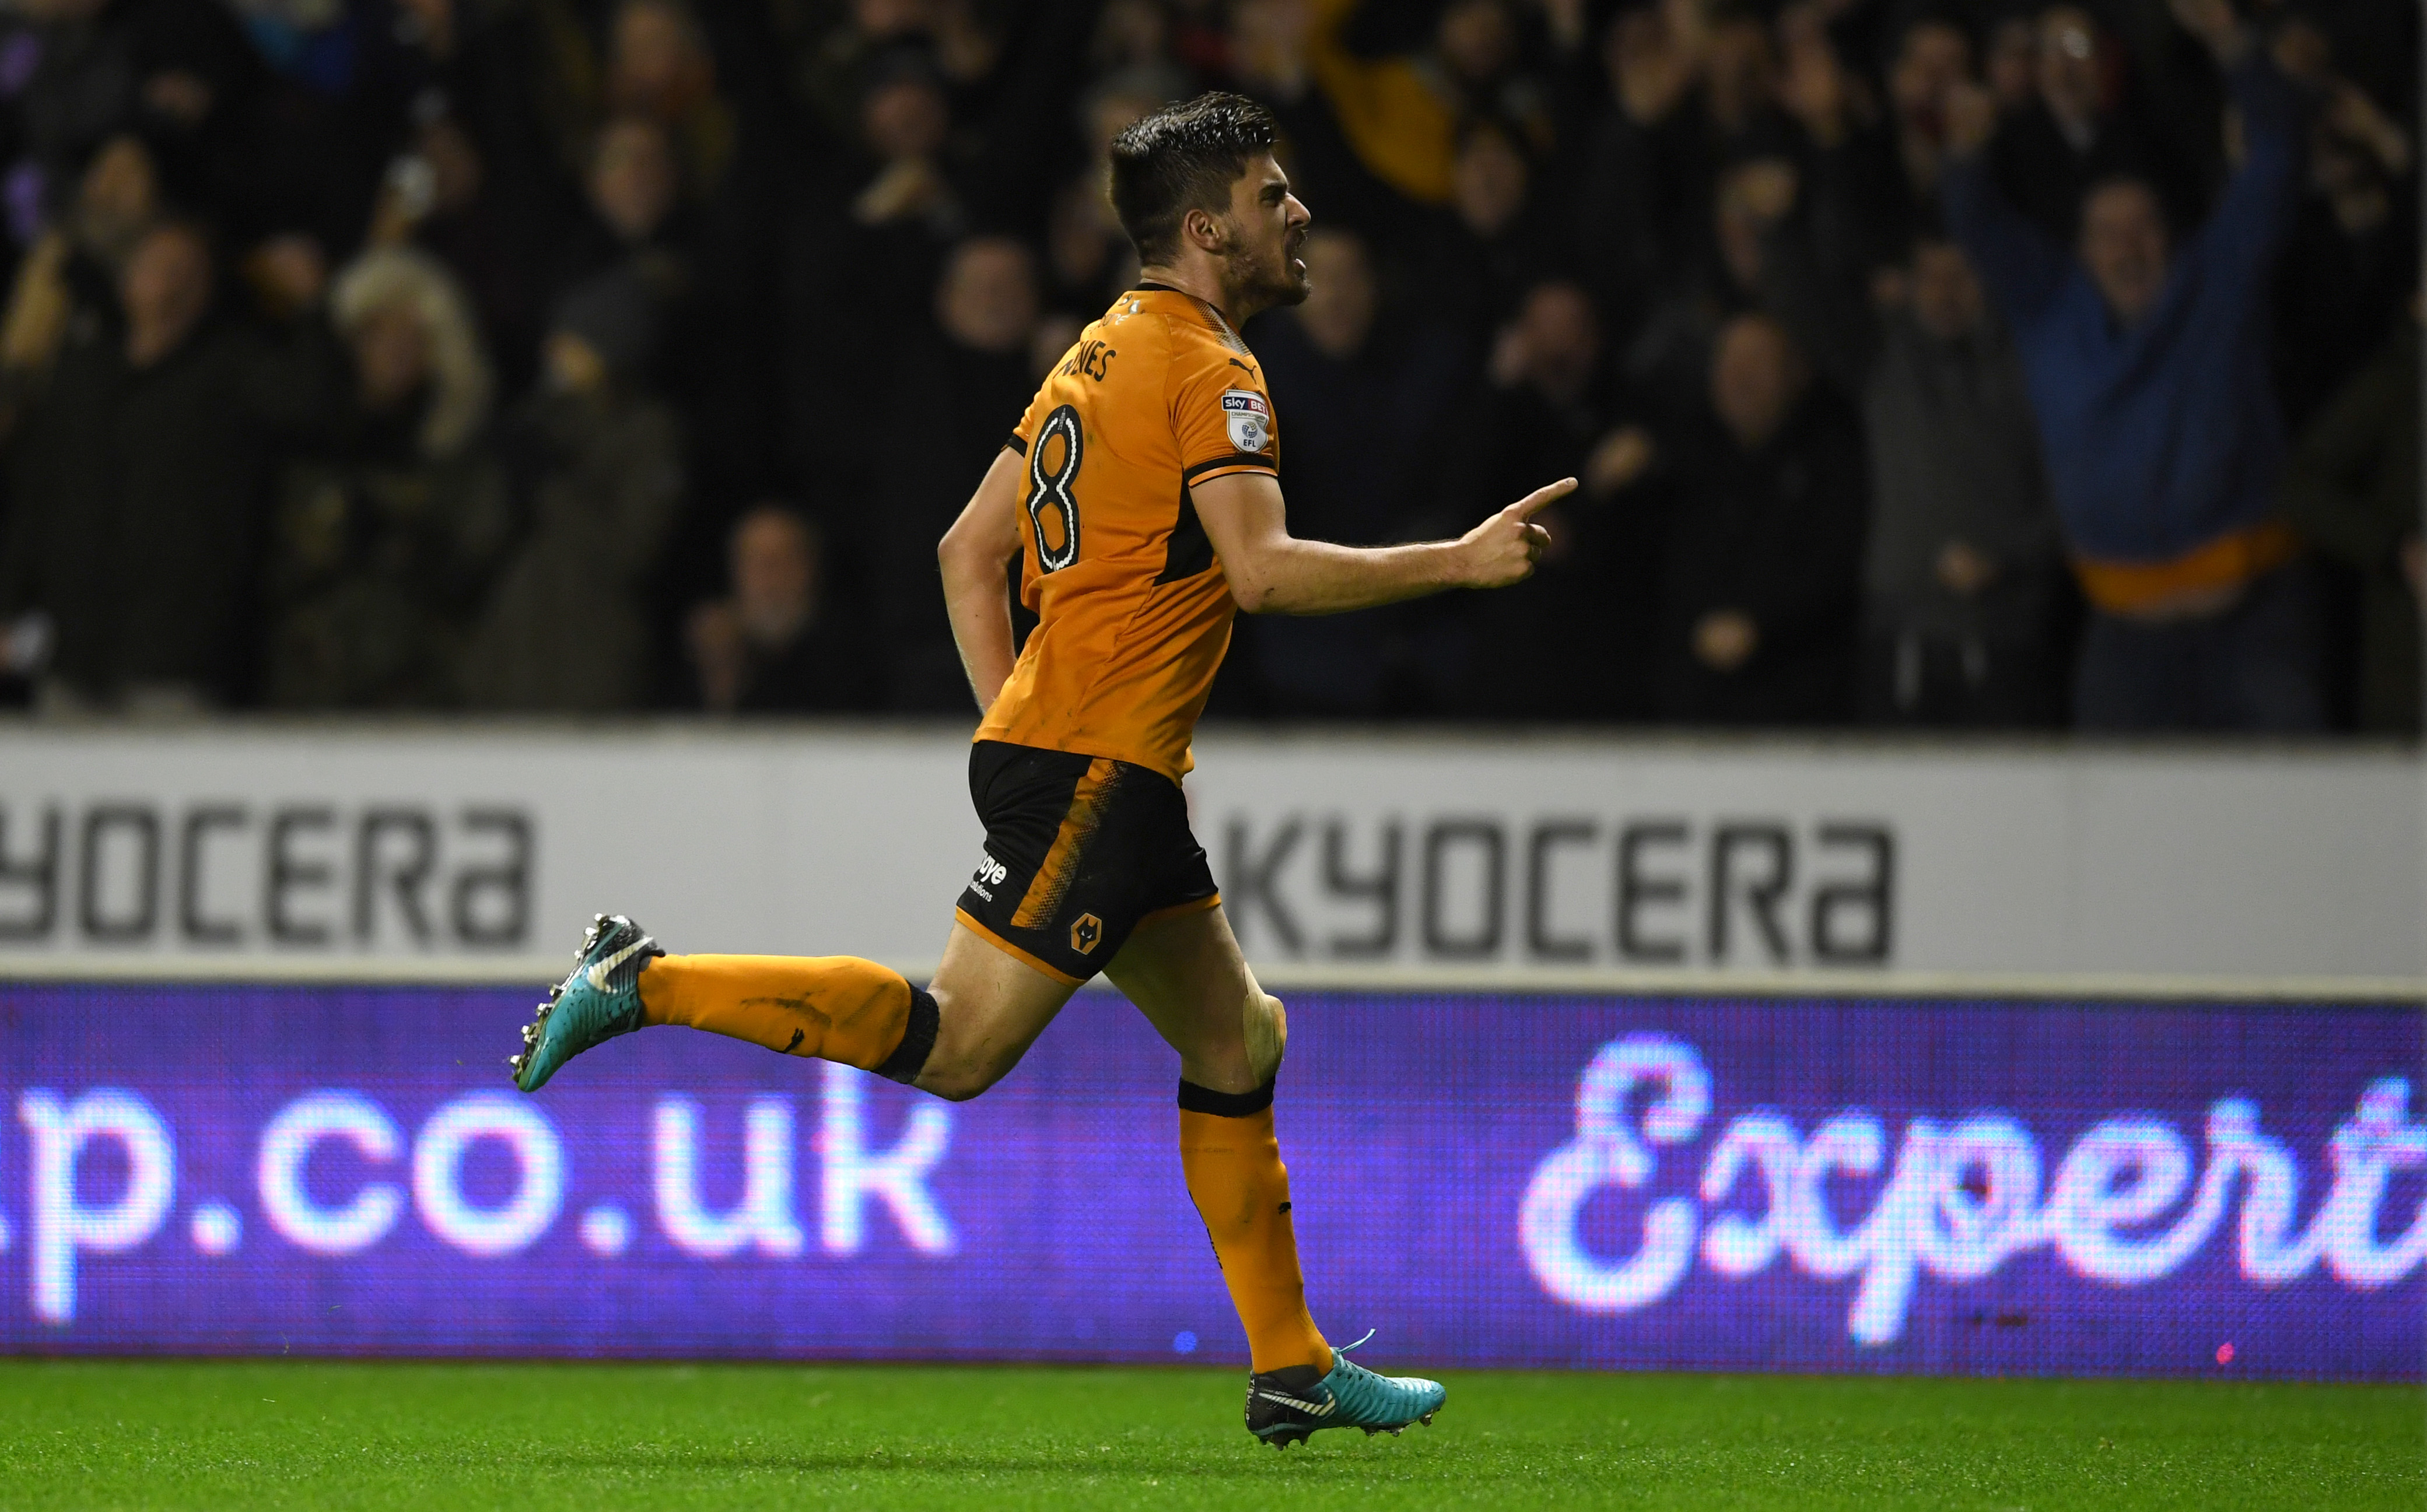 WOLVERHAMPTON, ENGLAND - JANUARY 02:  Ruben Neves of Wolverhampton Wanderers celebrates scoring the opening goal during the Sky Bet Championship match between Wolverhampton and Brentford at Molineux on January 2, 2018 in Wolverhampton, England.  (Photo by Gareth Copley/Getty Images)